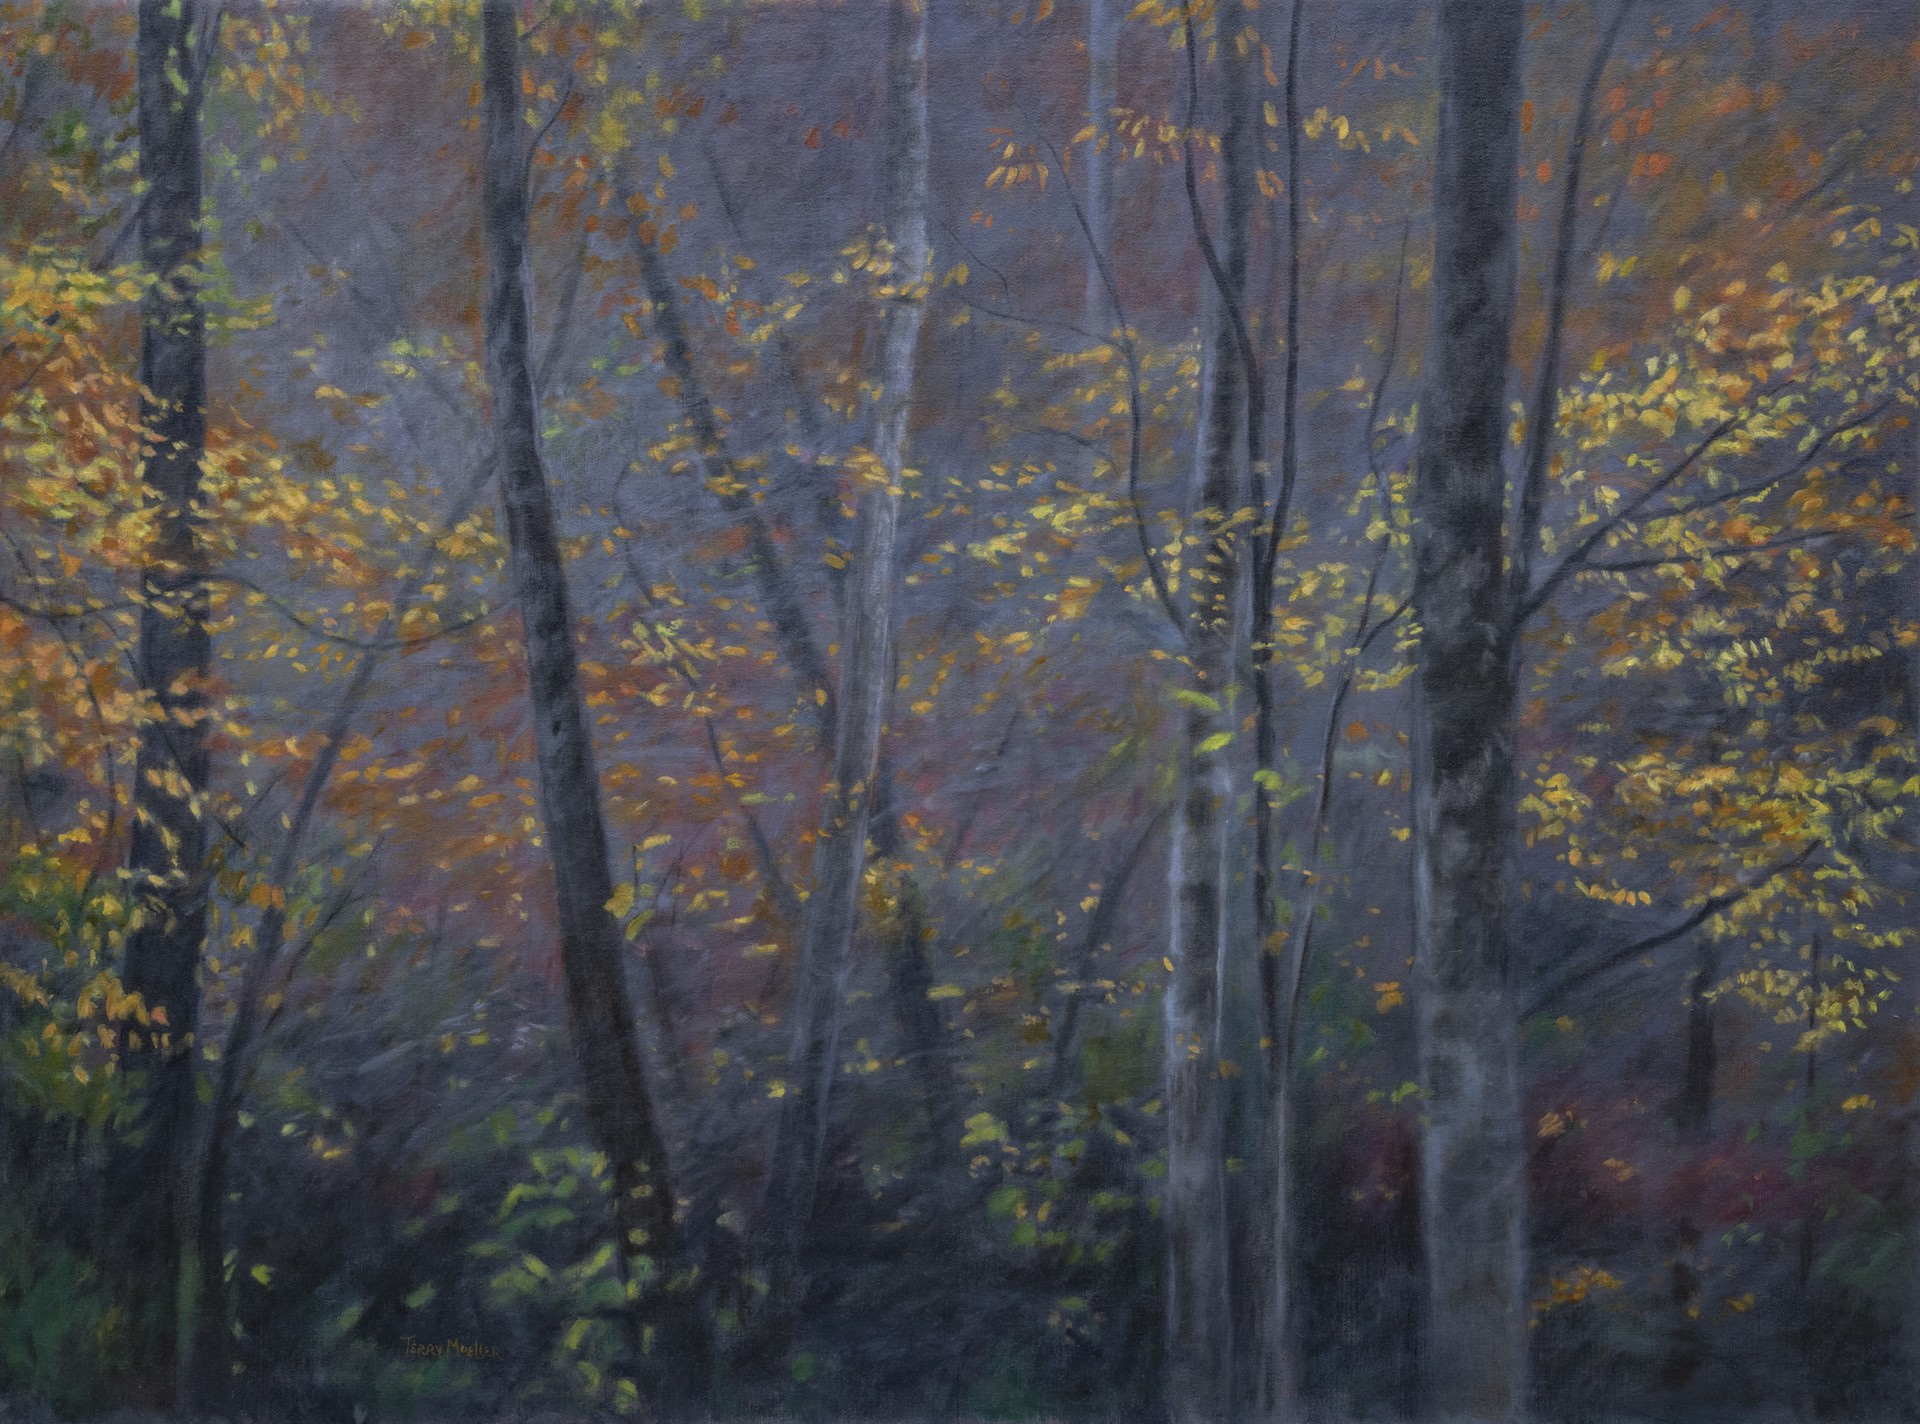 Morning Light in the Forest by Terry Moeller